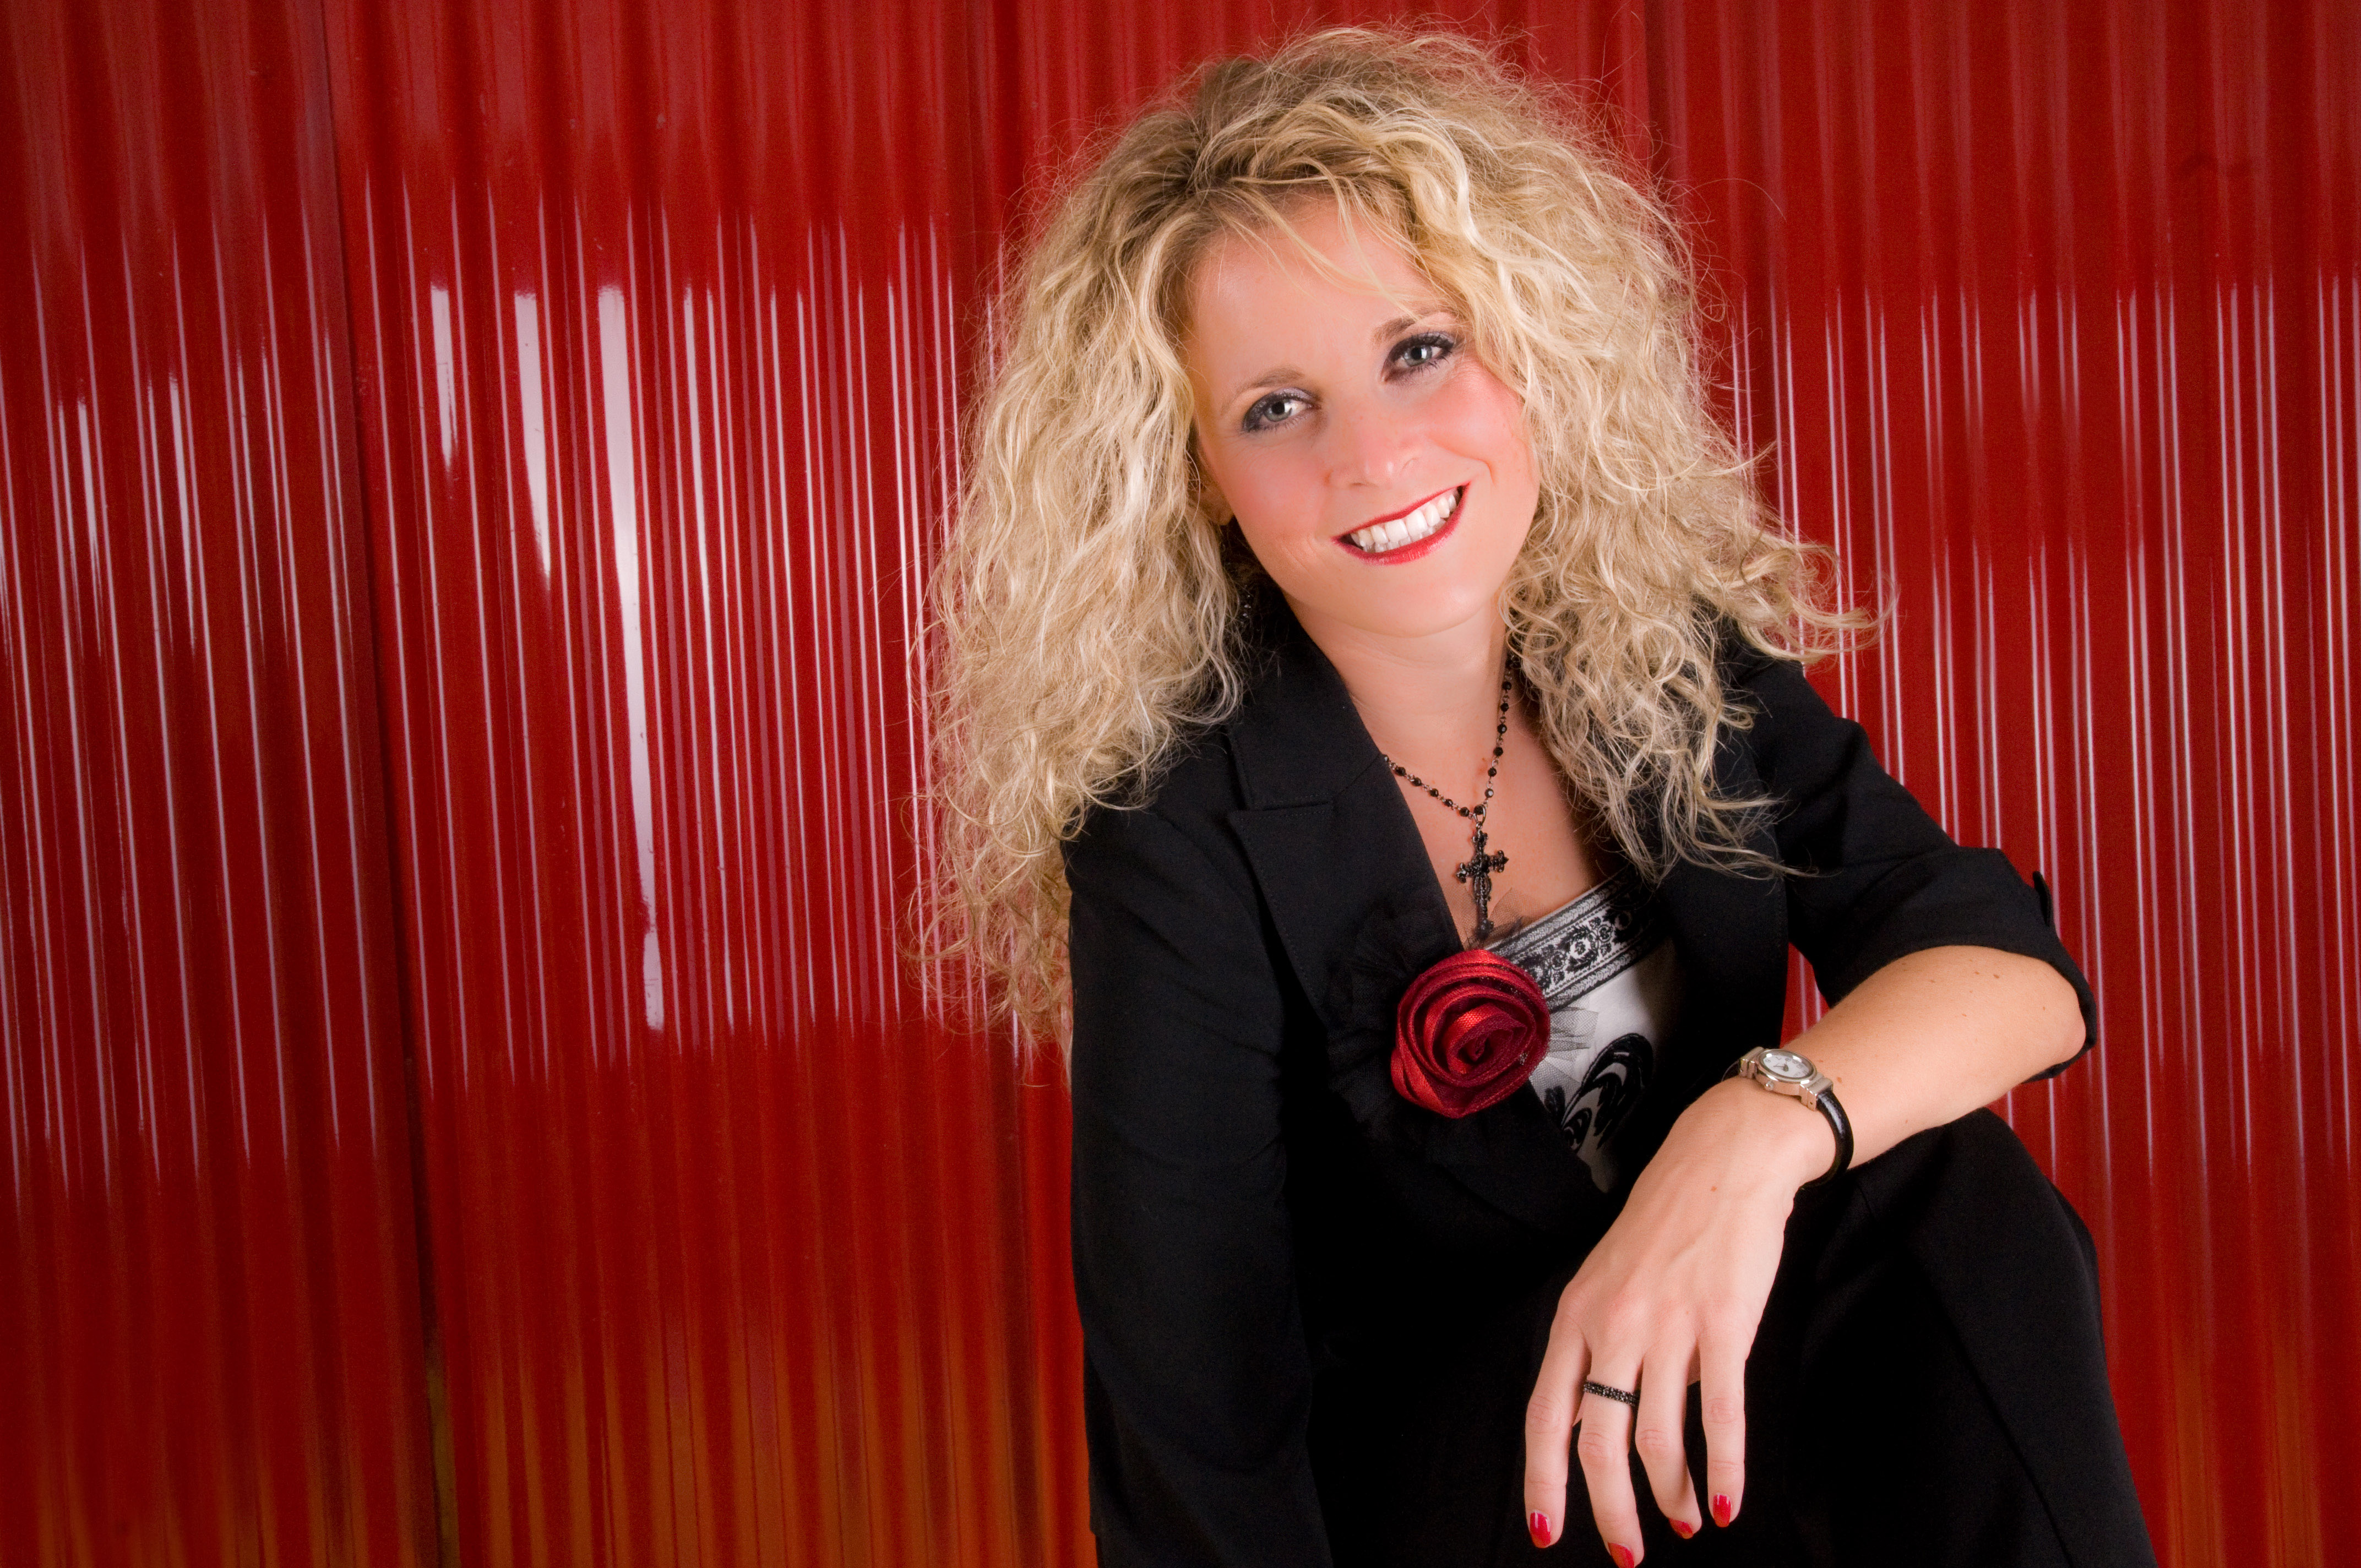 LINDSEY GRAHAM: Singing Praises with Passion - Southern Gospel Music News4288 x 2848